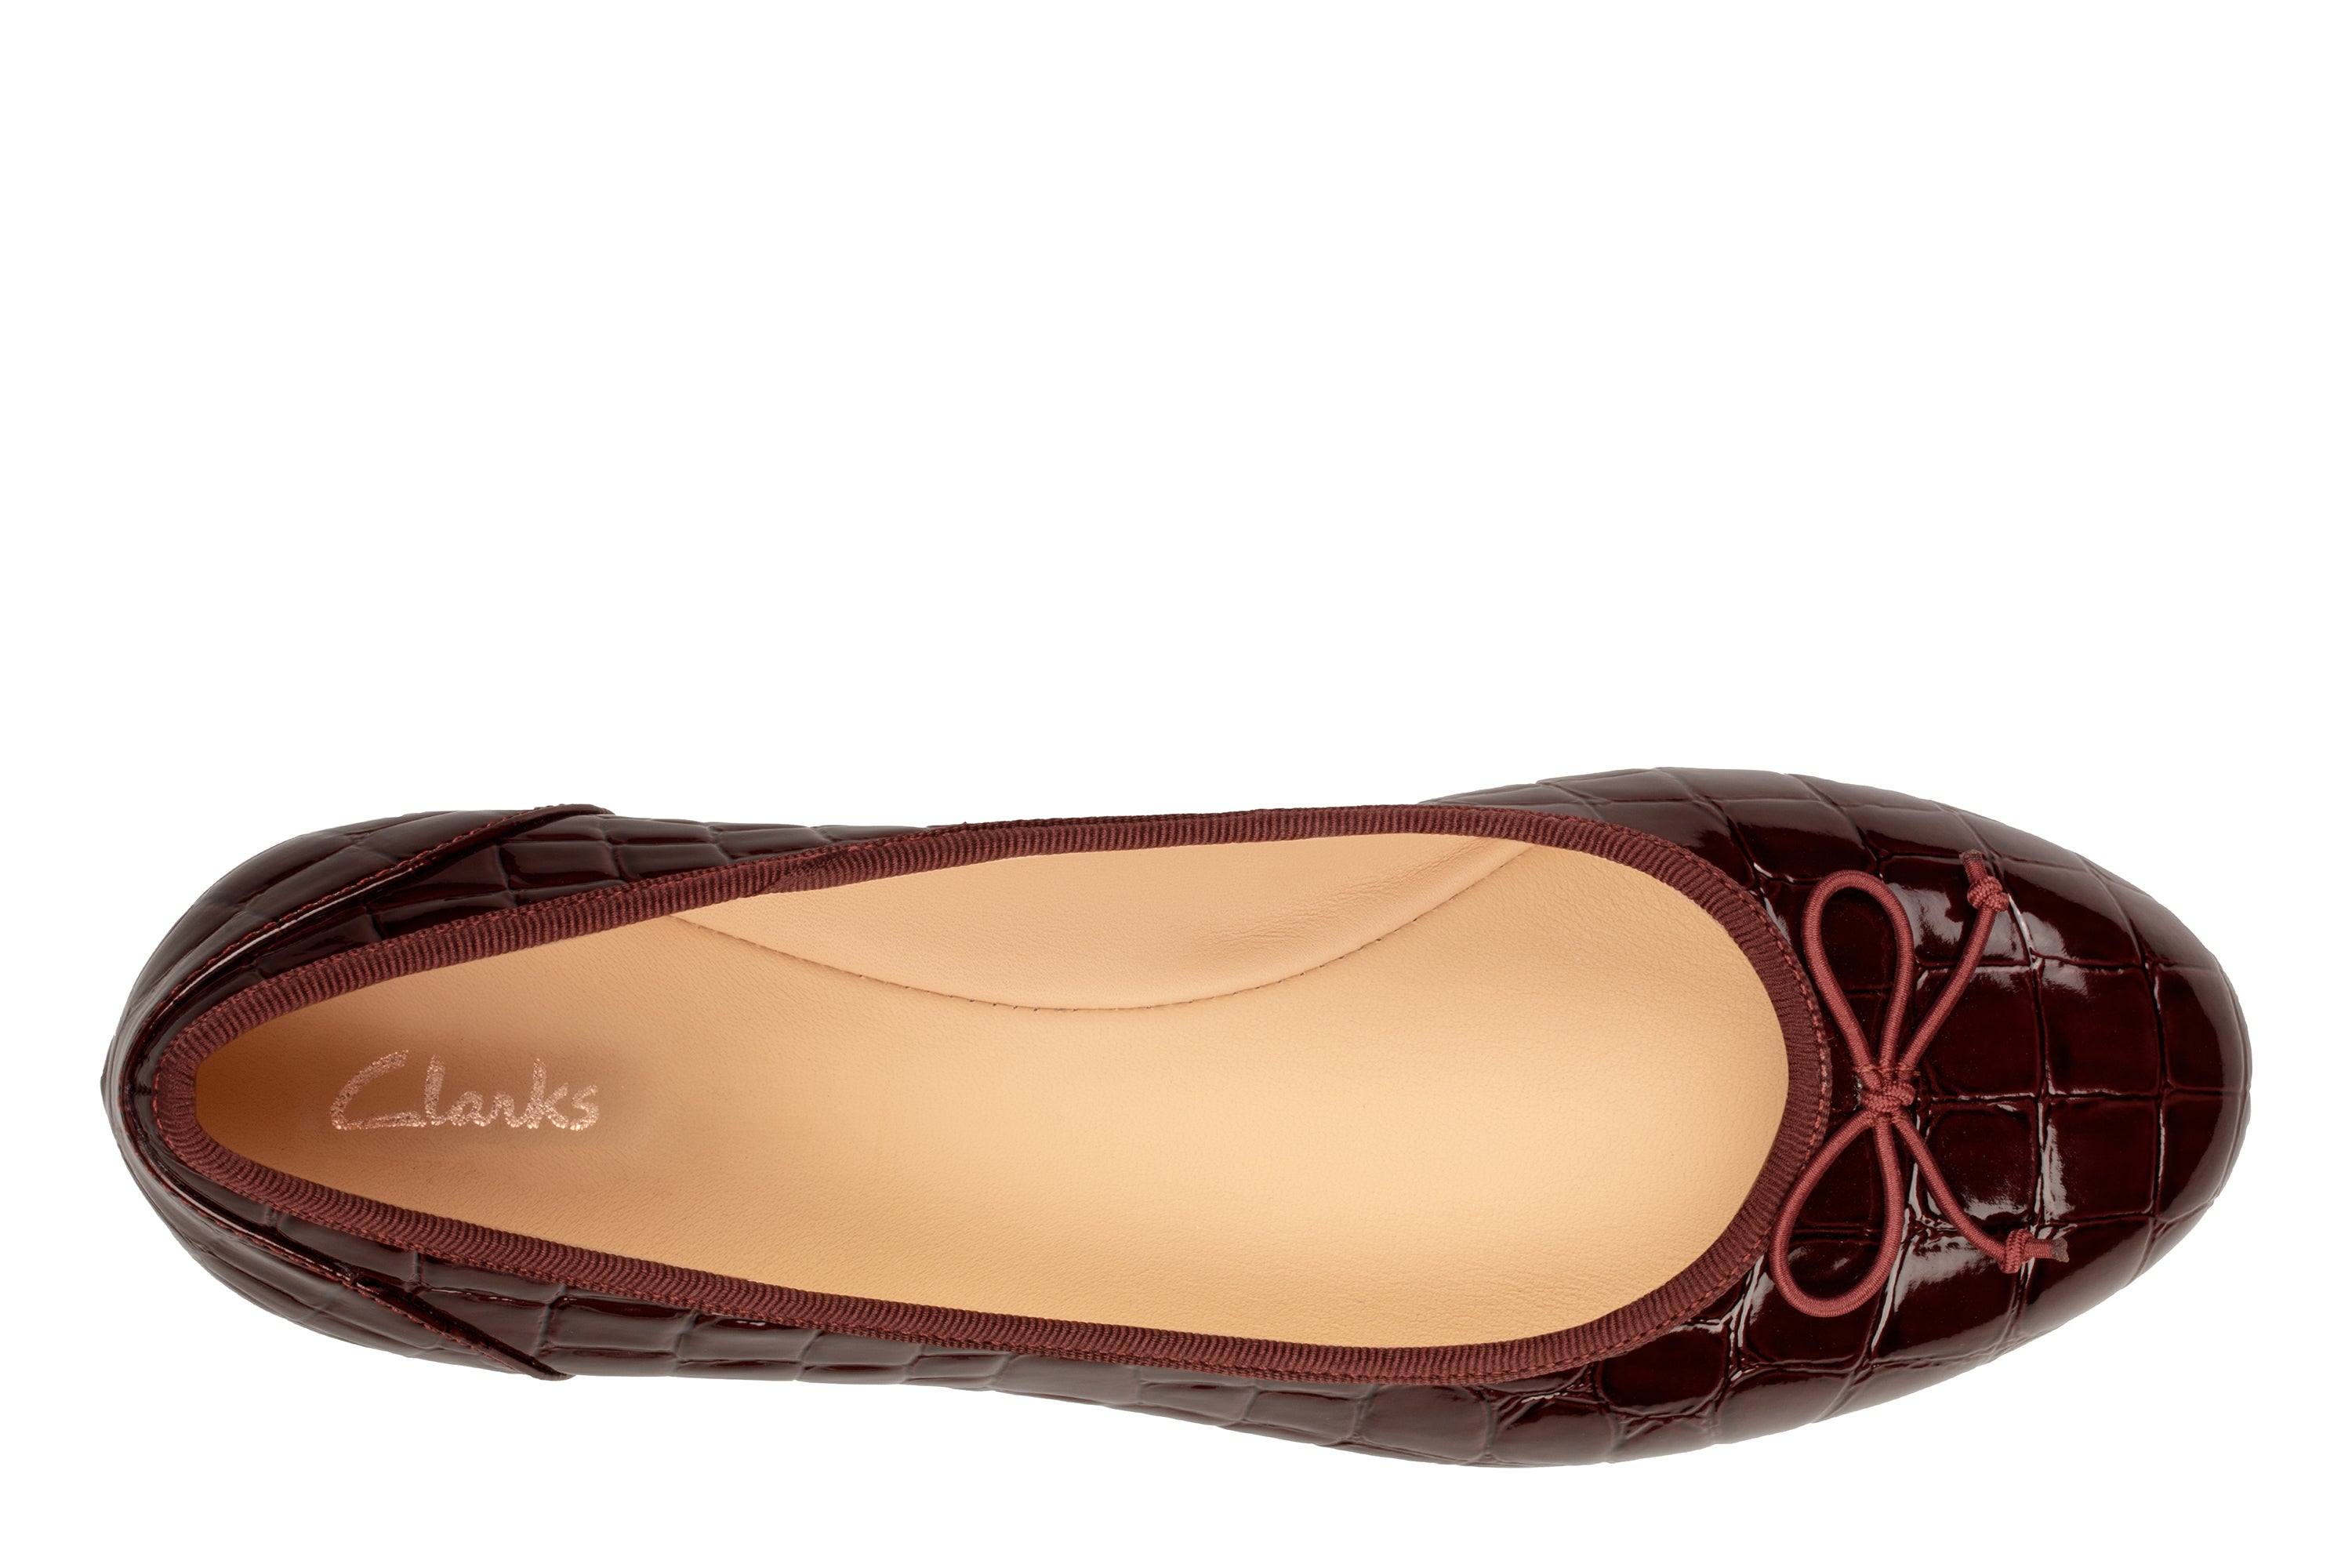 clarks couture bloom